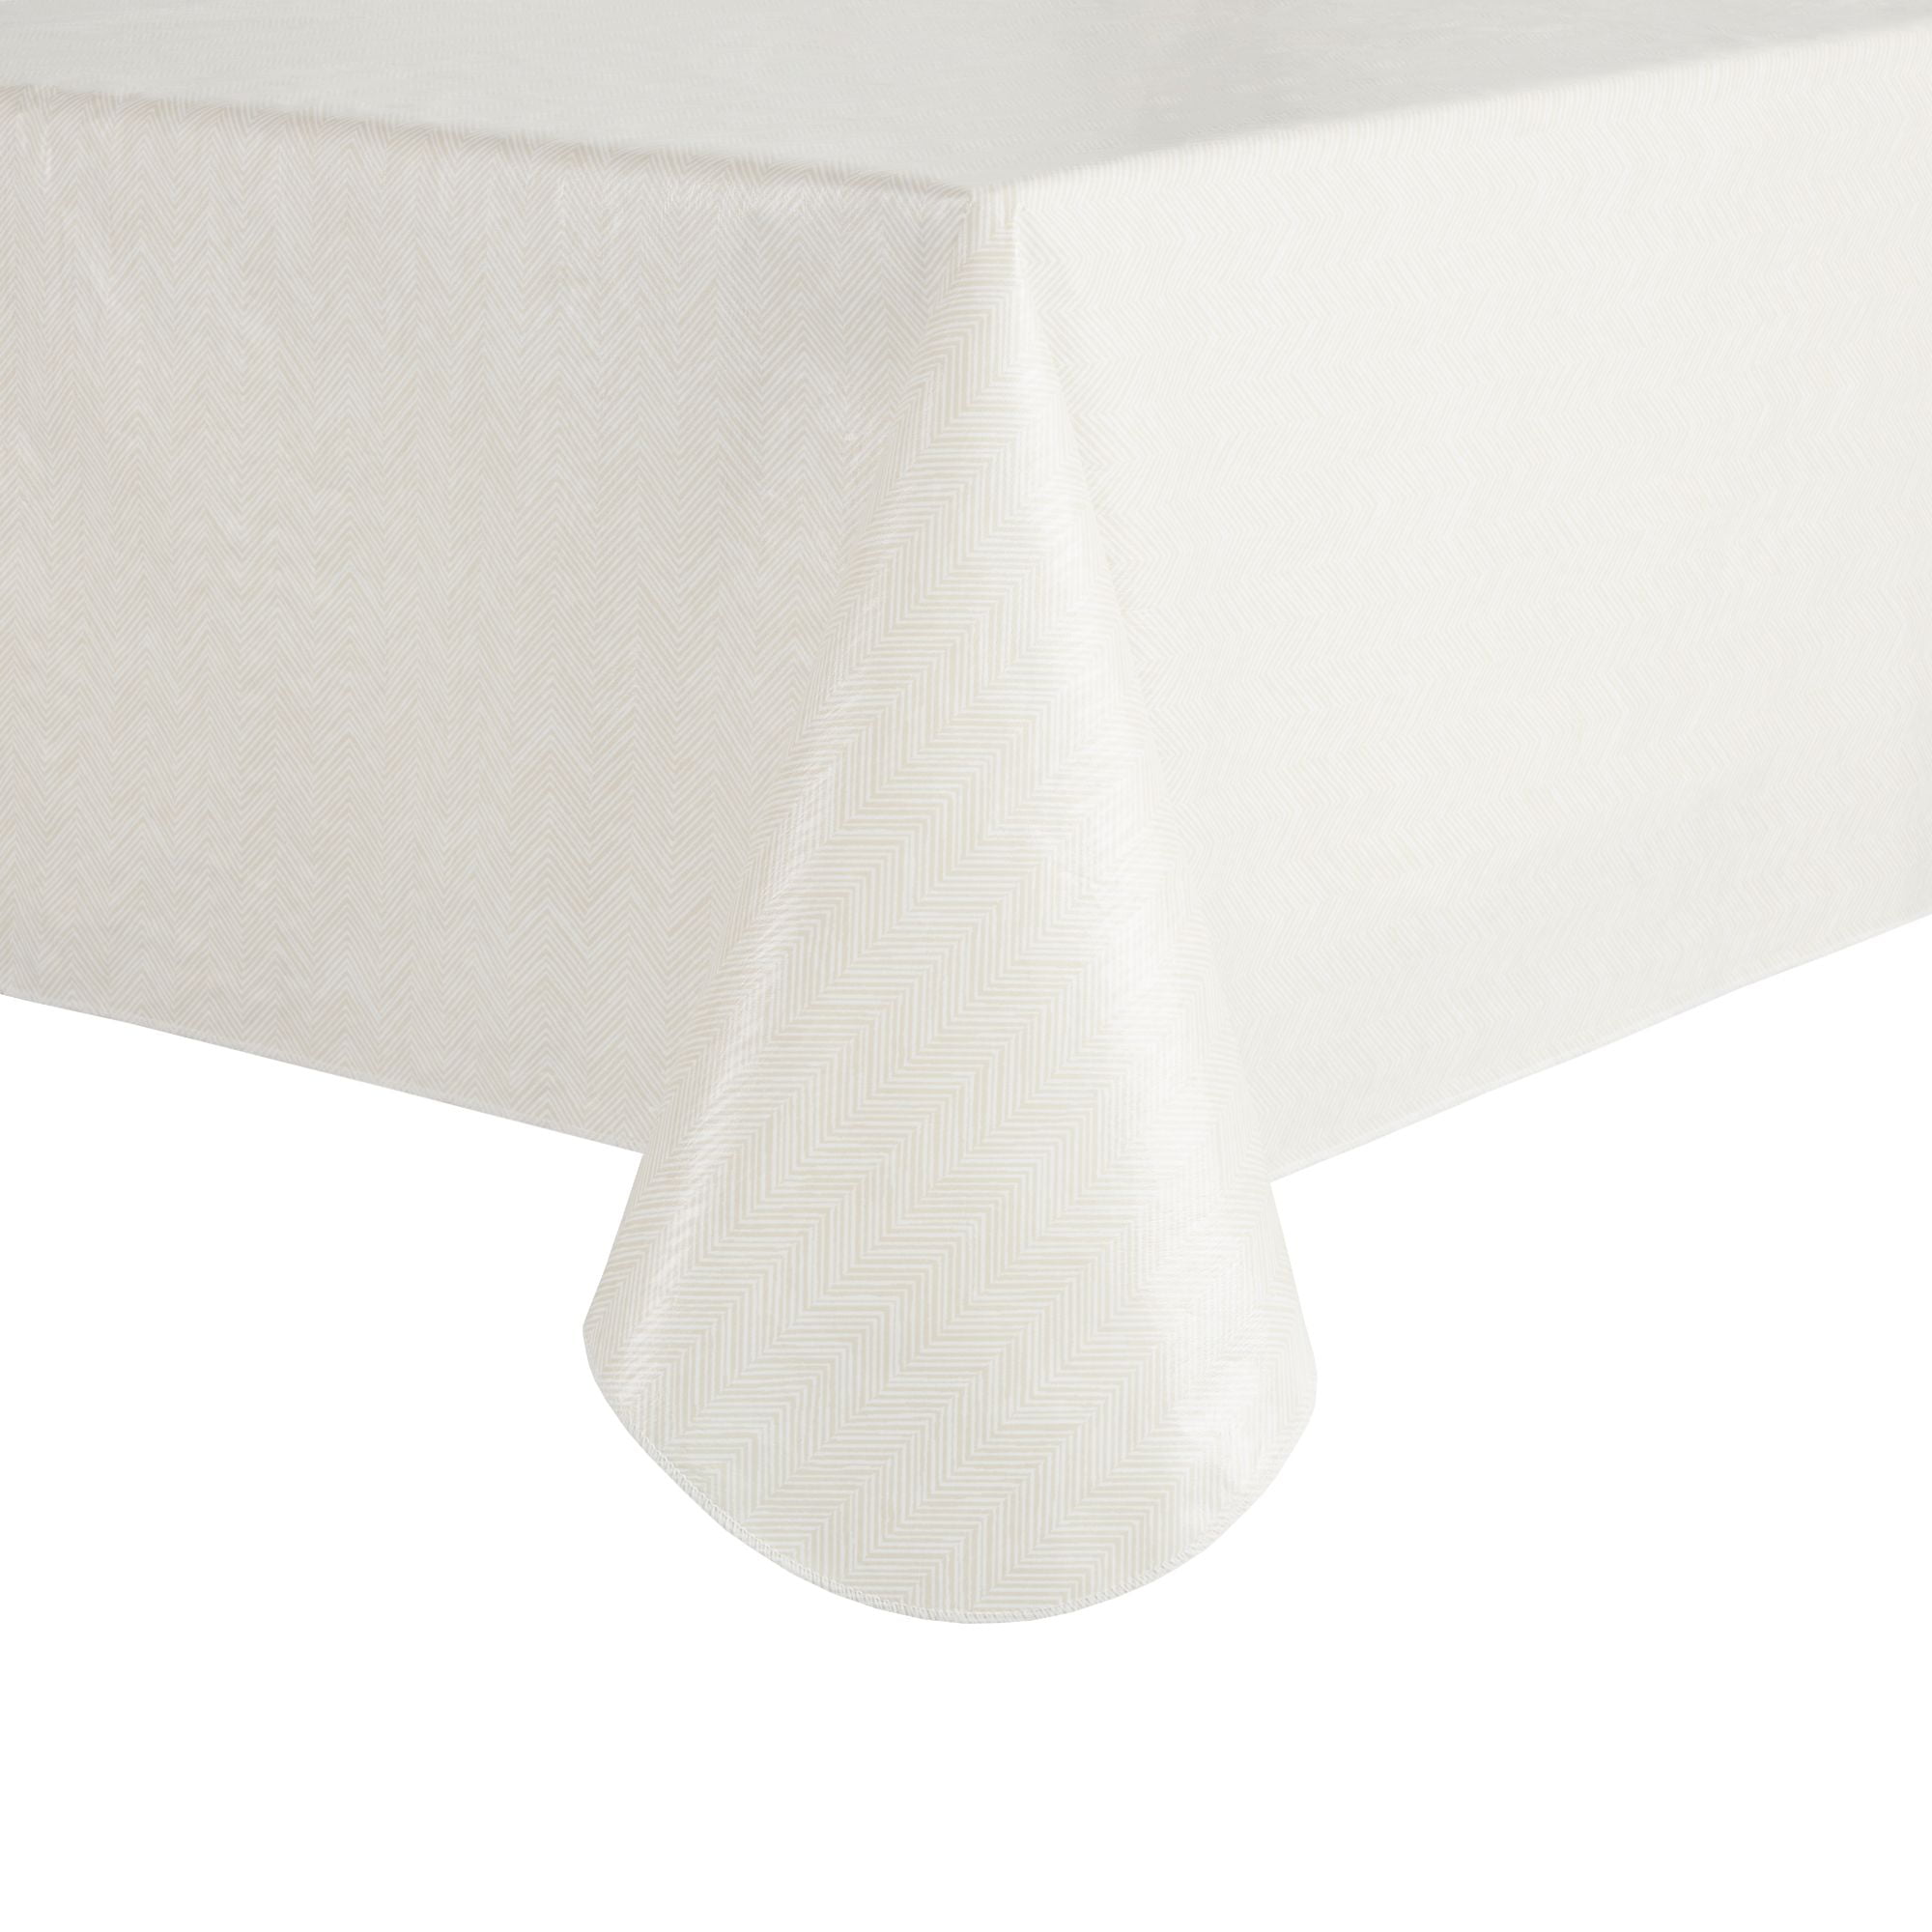 Mainstays Herringbone PEVA Tablecloth, Beige, 60"W x 84"L Rectangle, Available in various sizes and colors